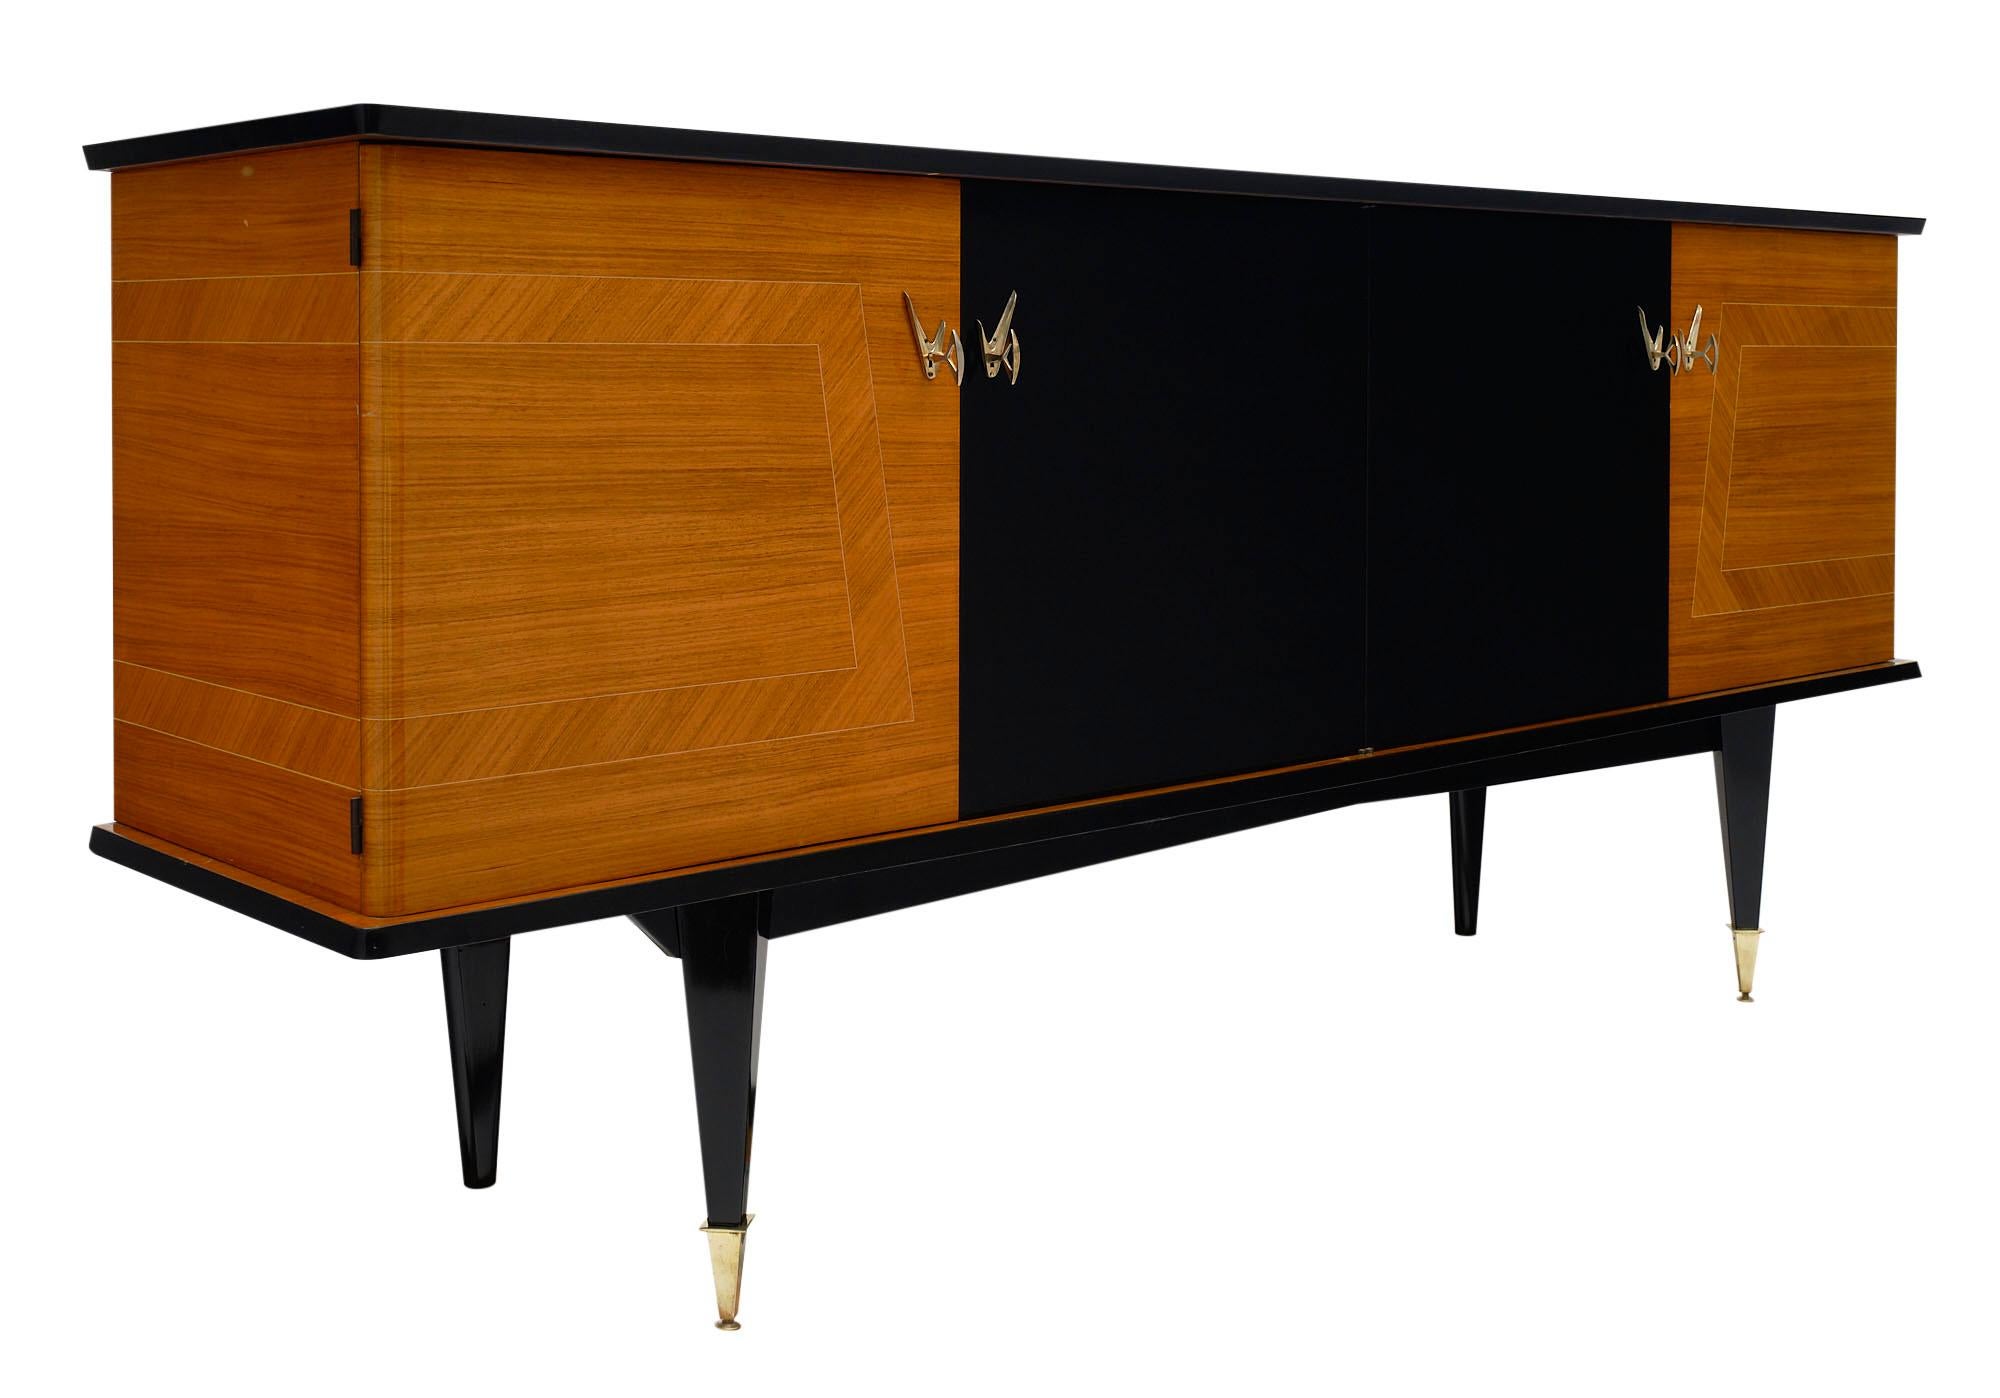 Buffet / enfilade from France made of inlayed rosewood and ebonized rosewood. The piece is supported by tapered legs; the front two feet are capped in brass. There are four doors which open to shelving and drawers. This credenza can also be used as